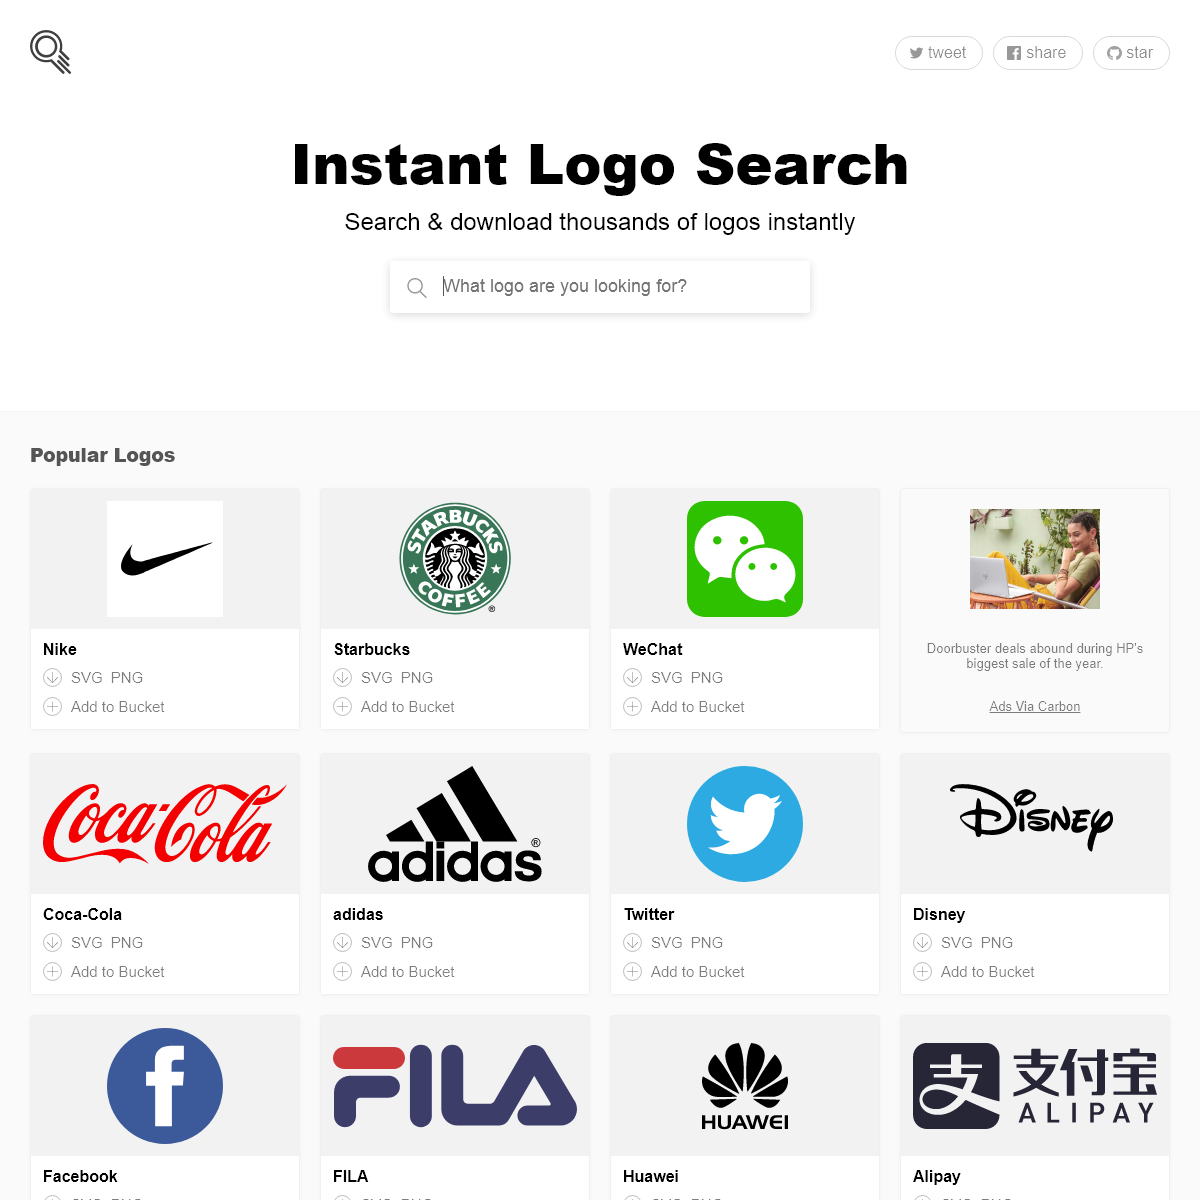 A complete backup of instantlogosearch.com